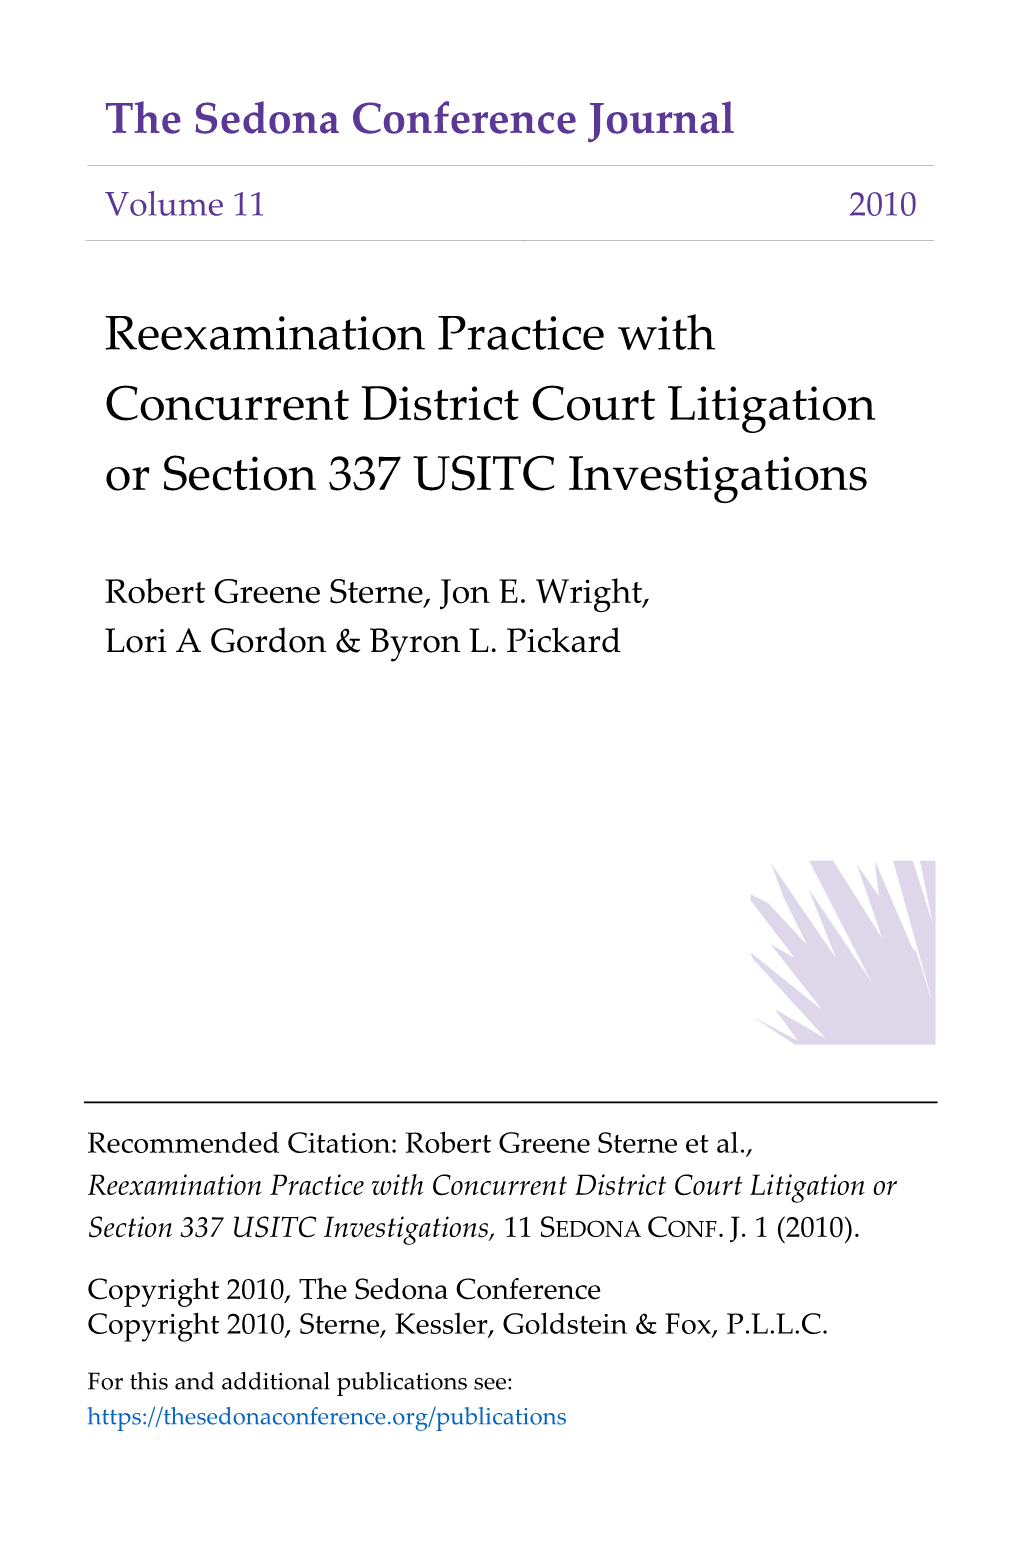 Reexamination Practice with Concurrent District Court Litigation Or Section 337 USITC Investigations